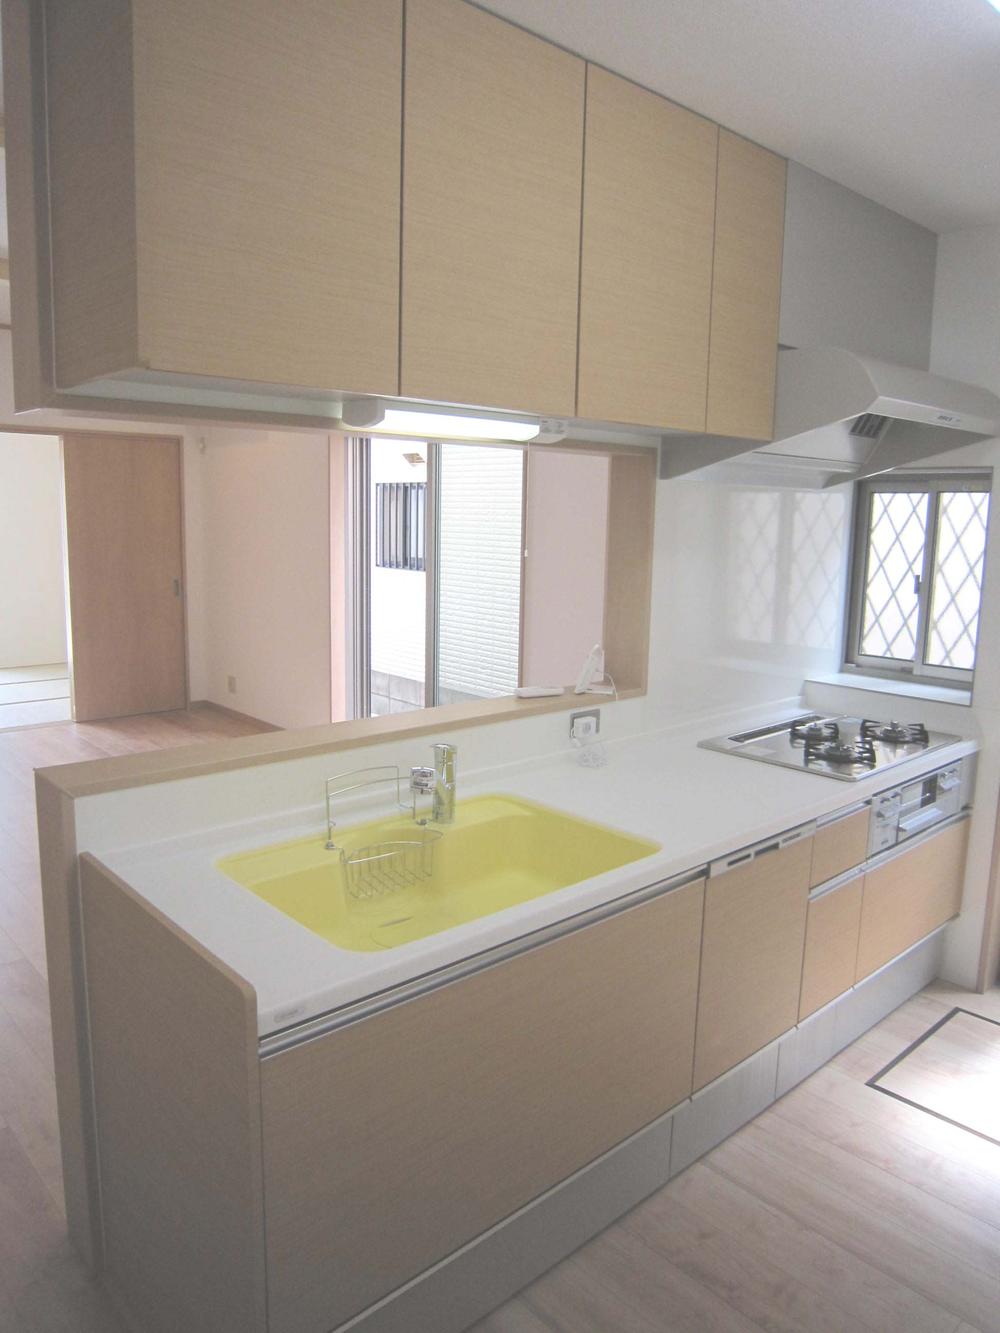 Kitchen. Yamaha System kitchen Glass top stove ・ Dishwasher ・ It is your easy-to-clean exhaust fans, such as cooking is fun kitchen